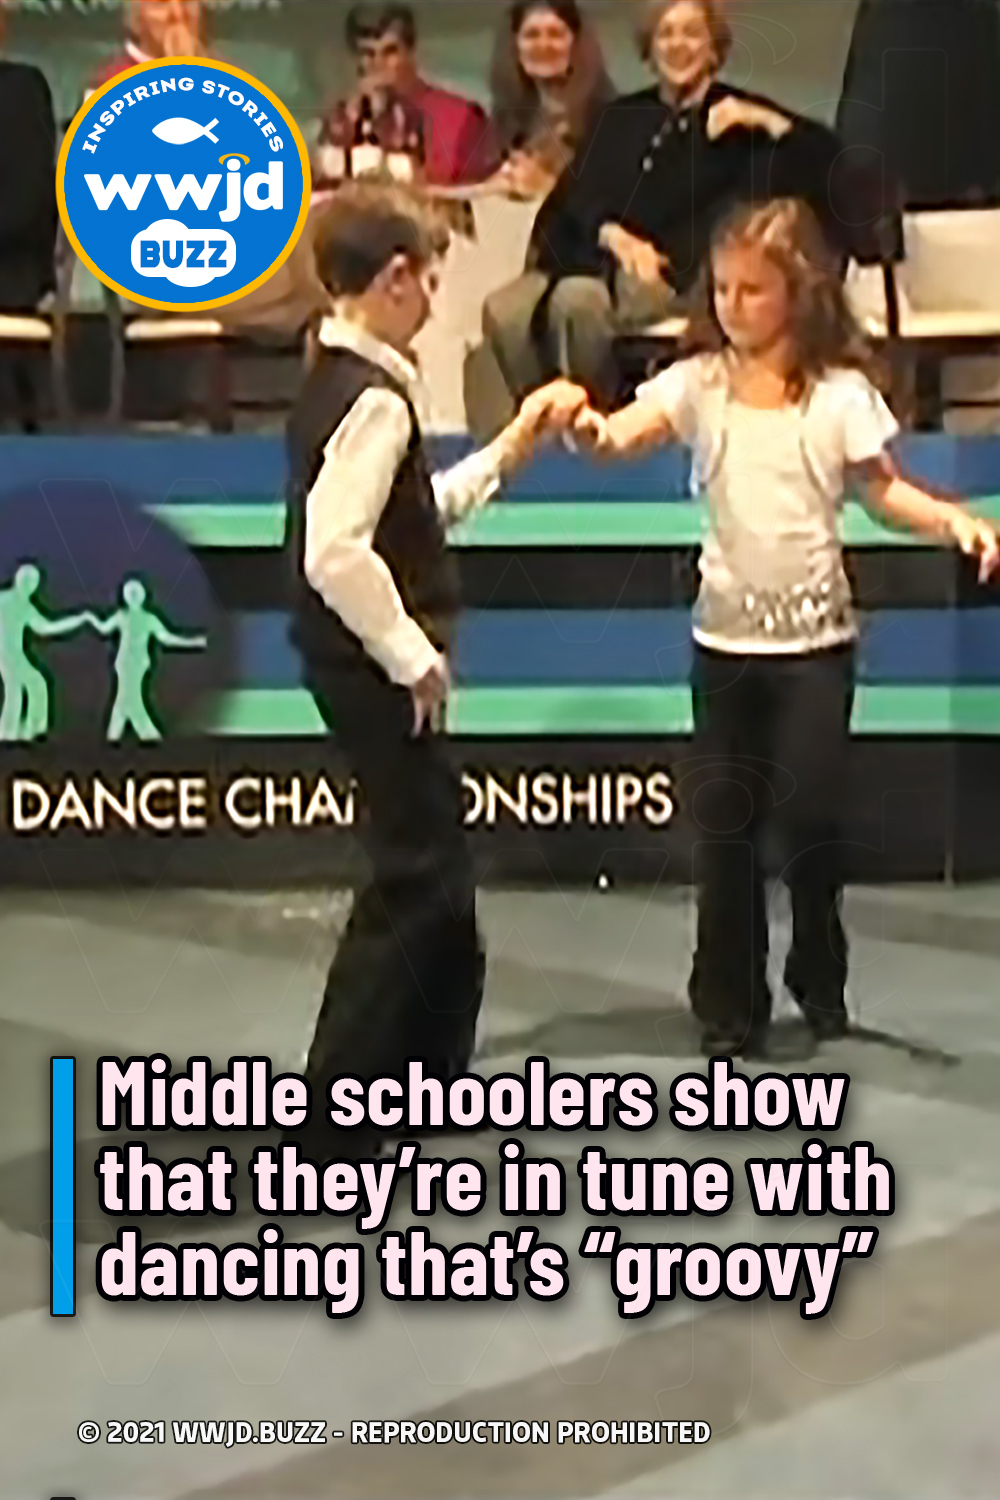 Middle schoolers show that they’re in tune with dancing that’s “groovy”